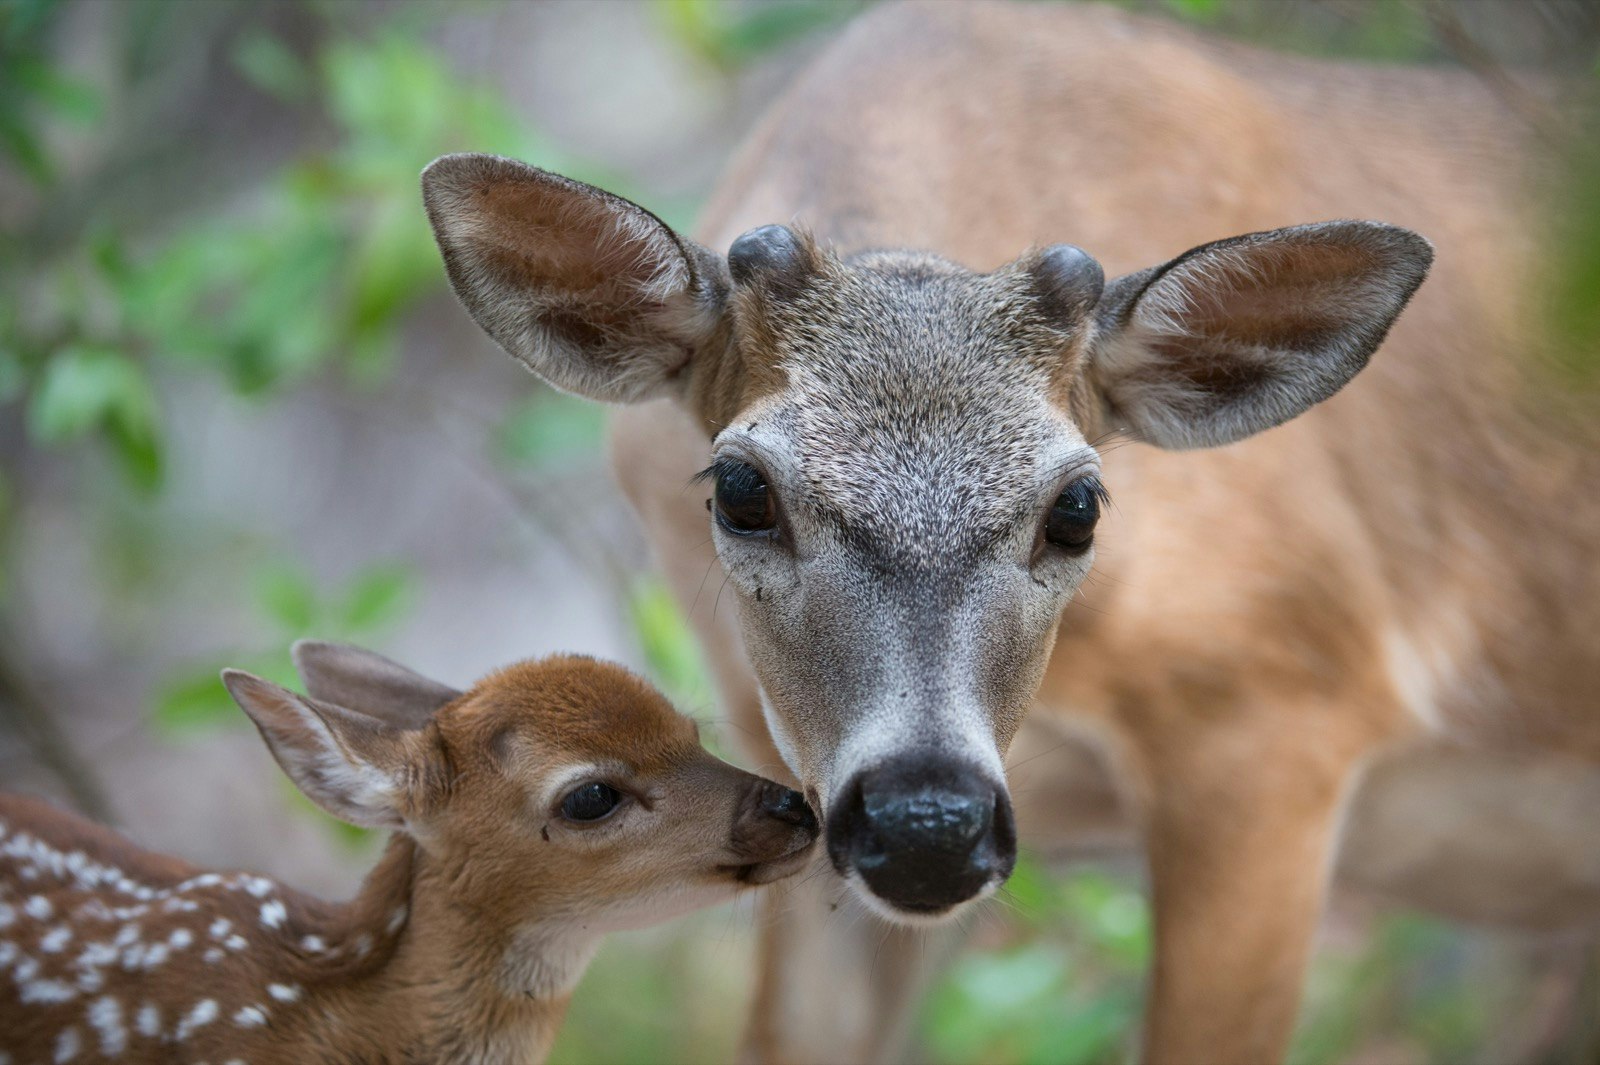 A baby deer nuzzles its mother in an up close shot of their faces